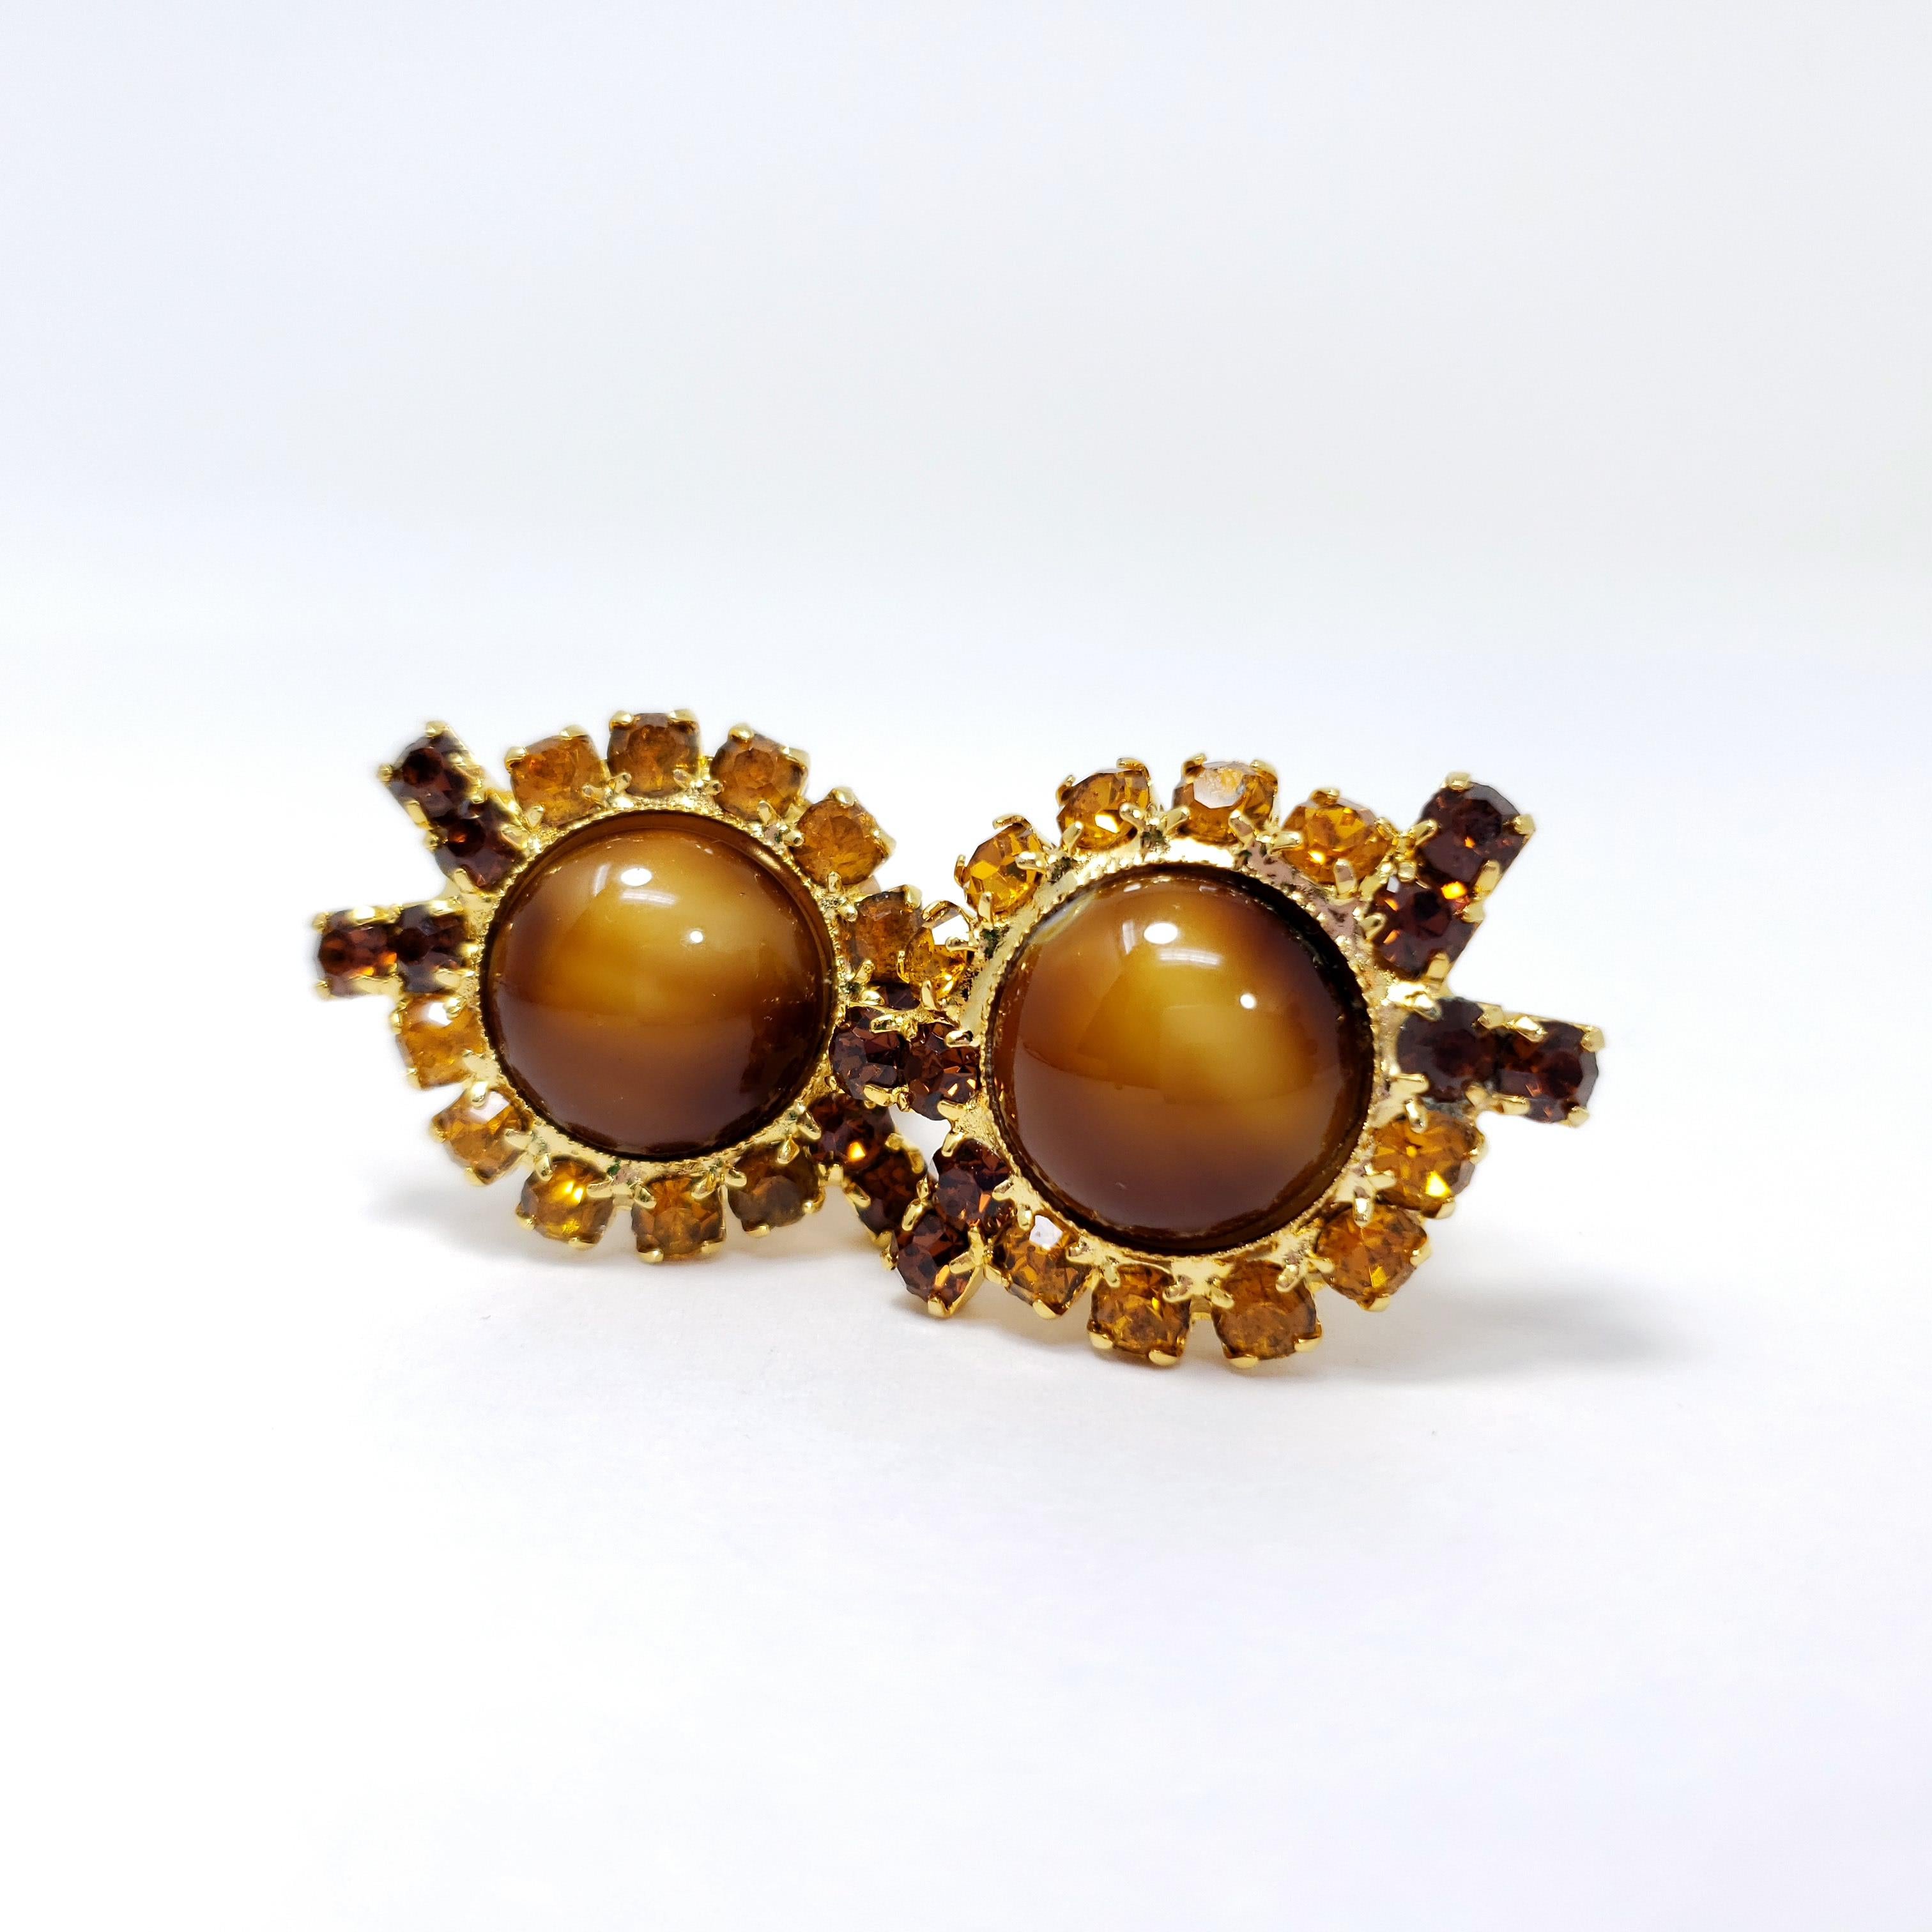 A pair of vintage cuff links and stud. Exquisite gold finish, with amber crystals and mesh accents.

Excellent condition with minimal wear, consistent with age.